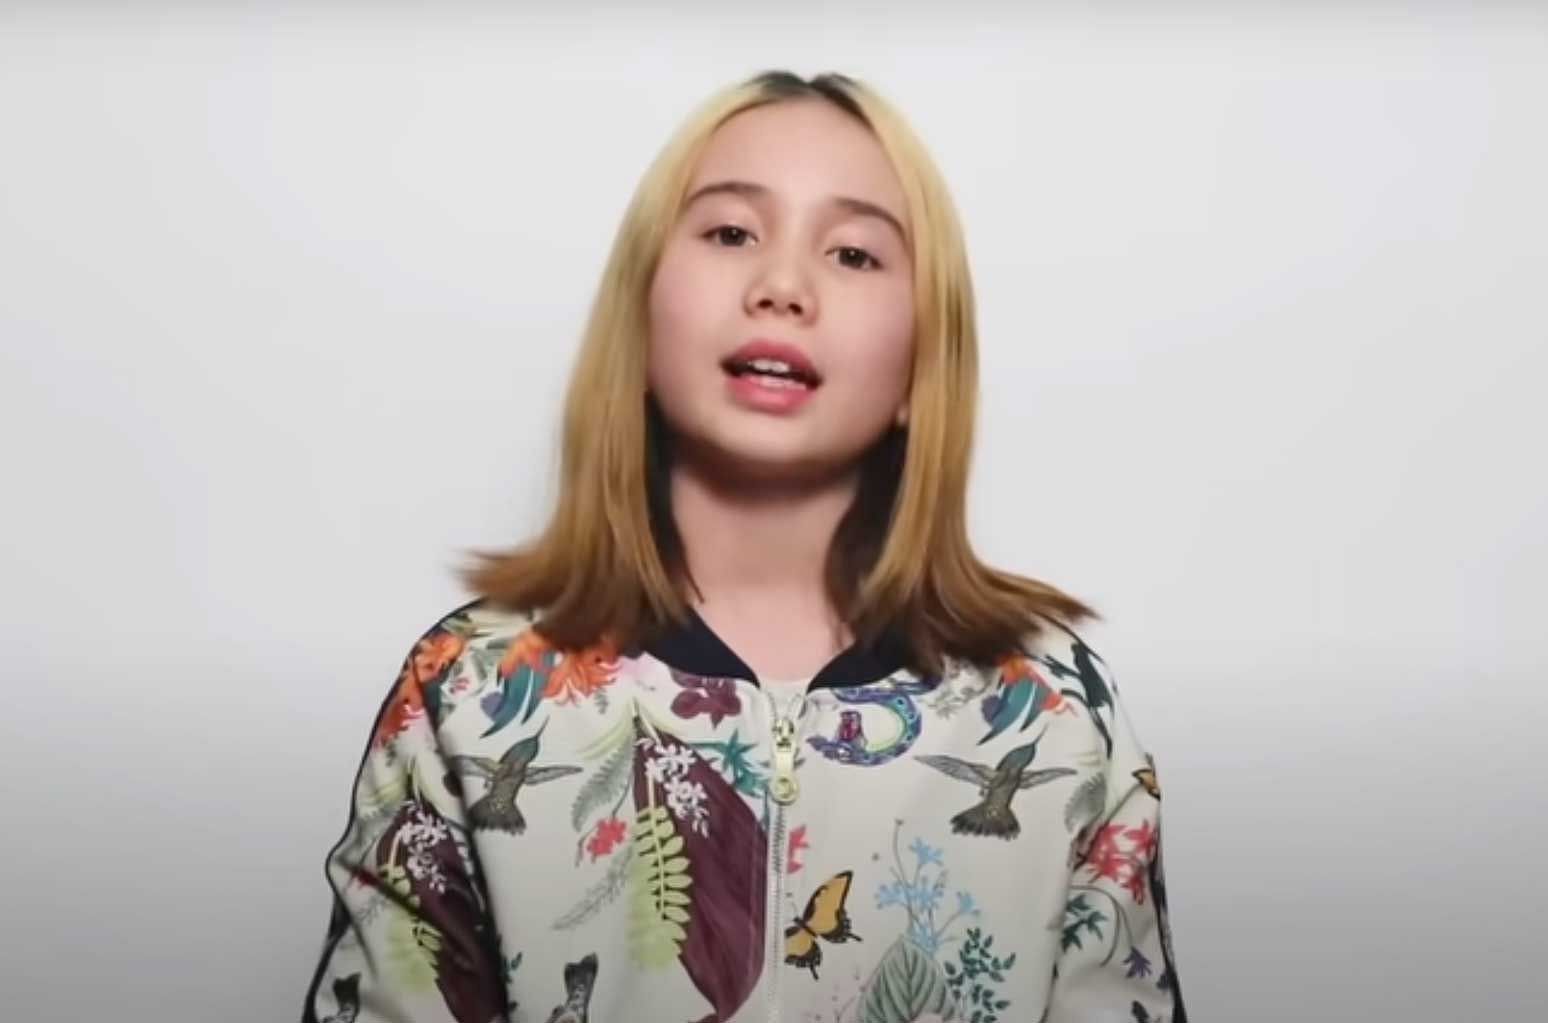 The unexpected death of internet sensation Lil Tay at the age of 14 has shocked her admirers and the online world (Image Lil Tay/ Youtube)